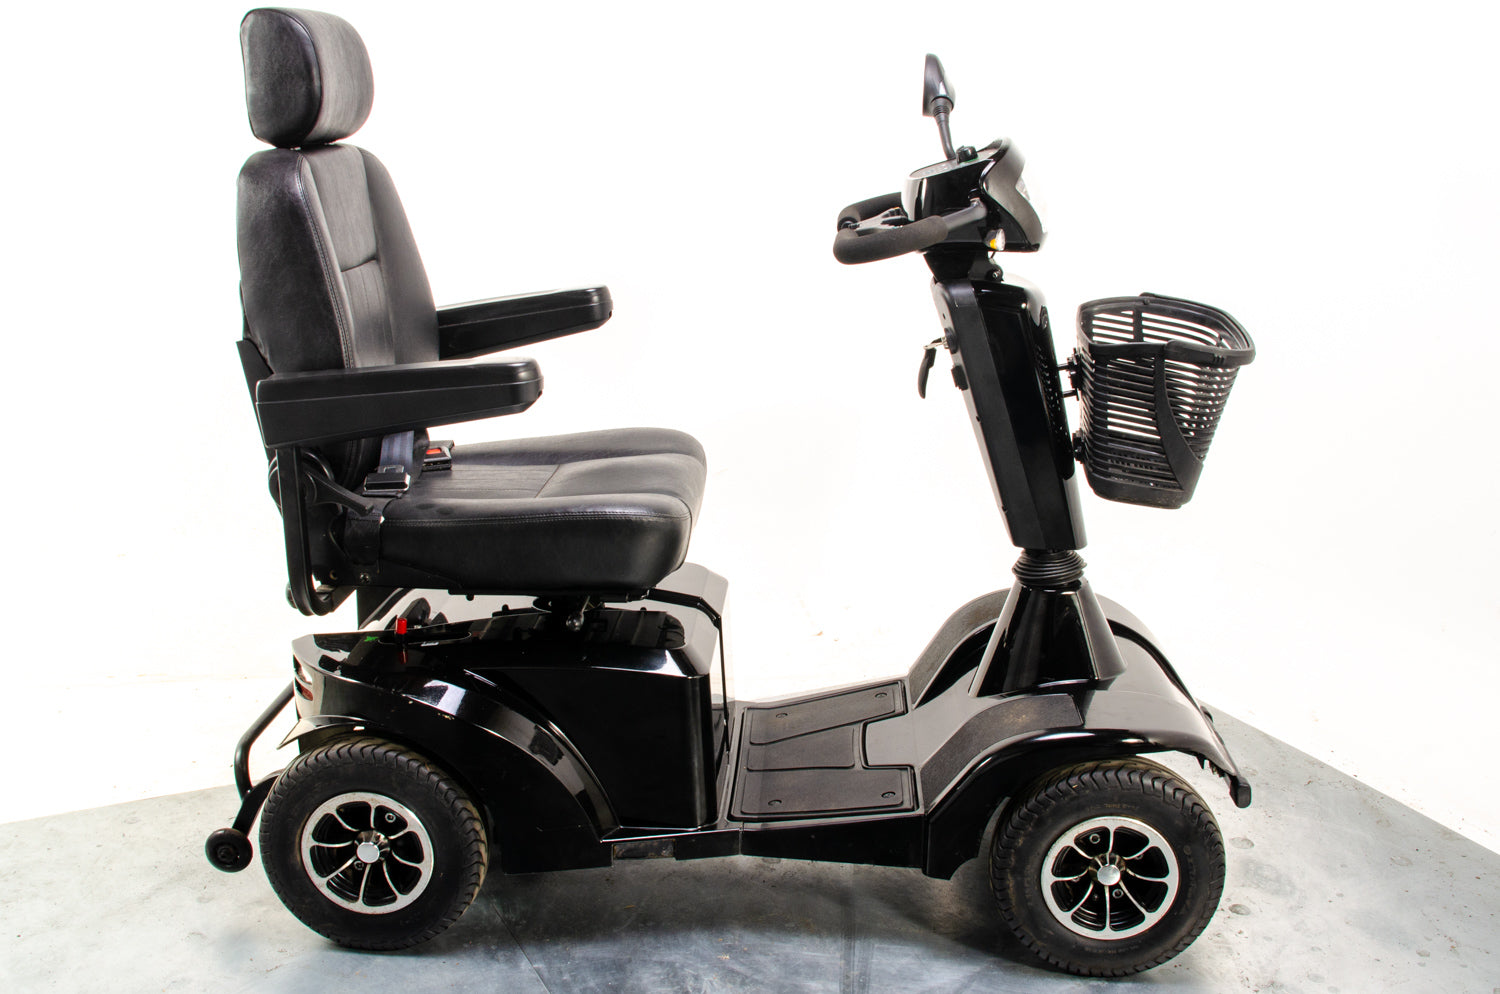 Sterling S700 Used Mobility Scooter Large 8mph All-Terrain Sunrise Medical Black 13086